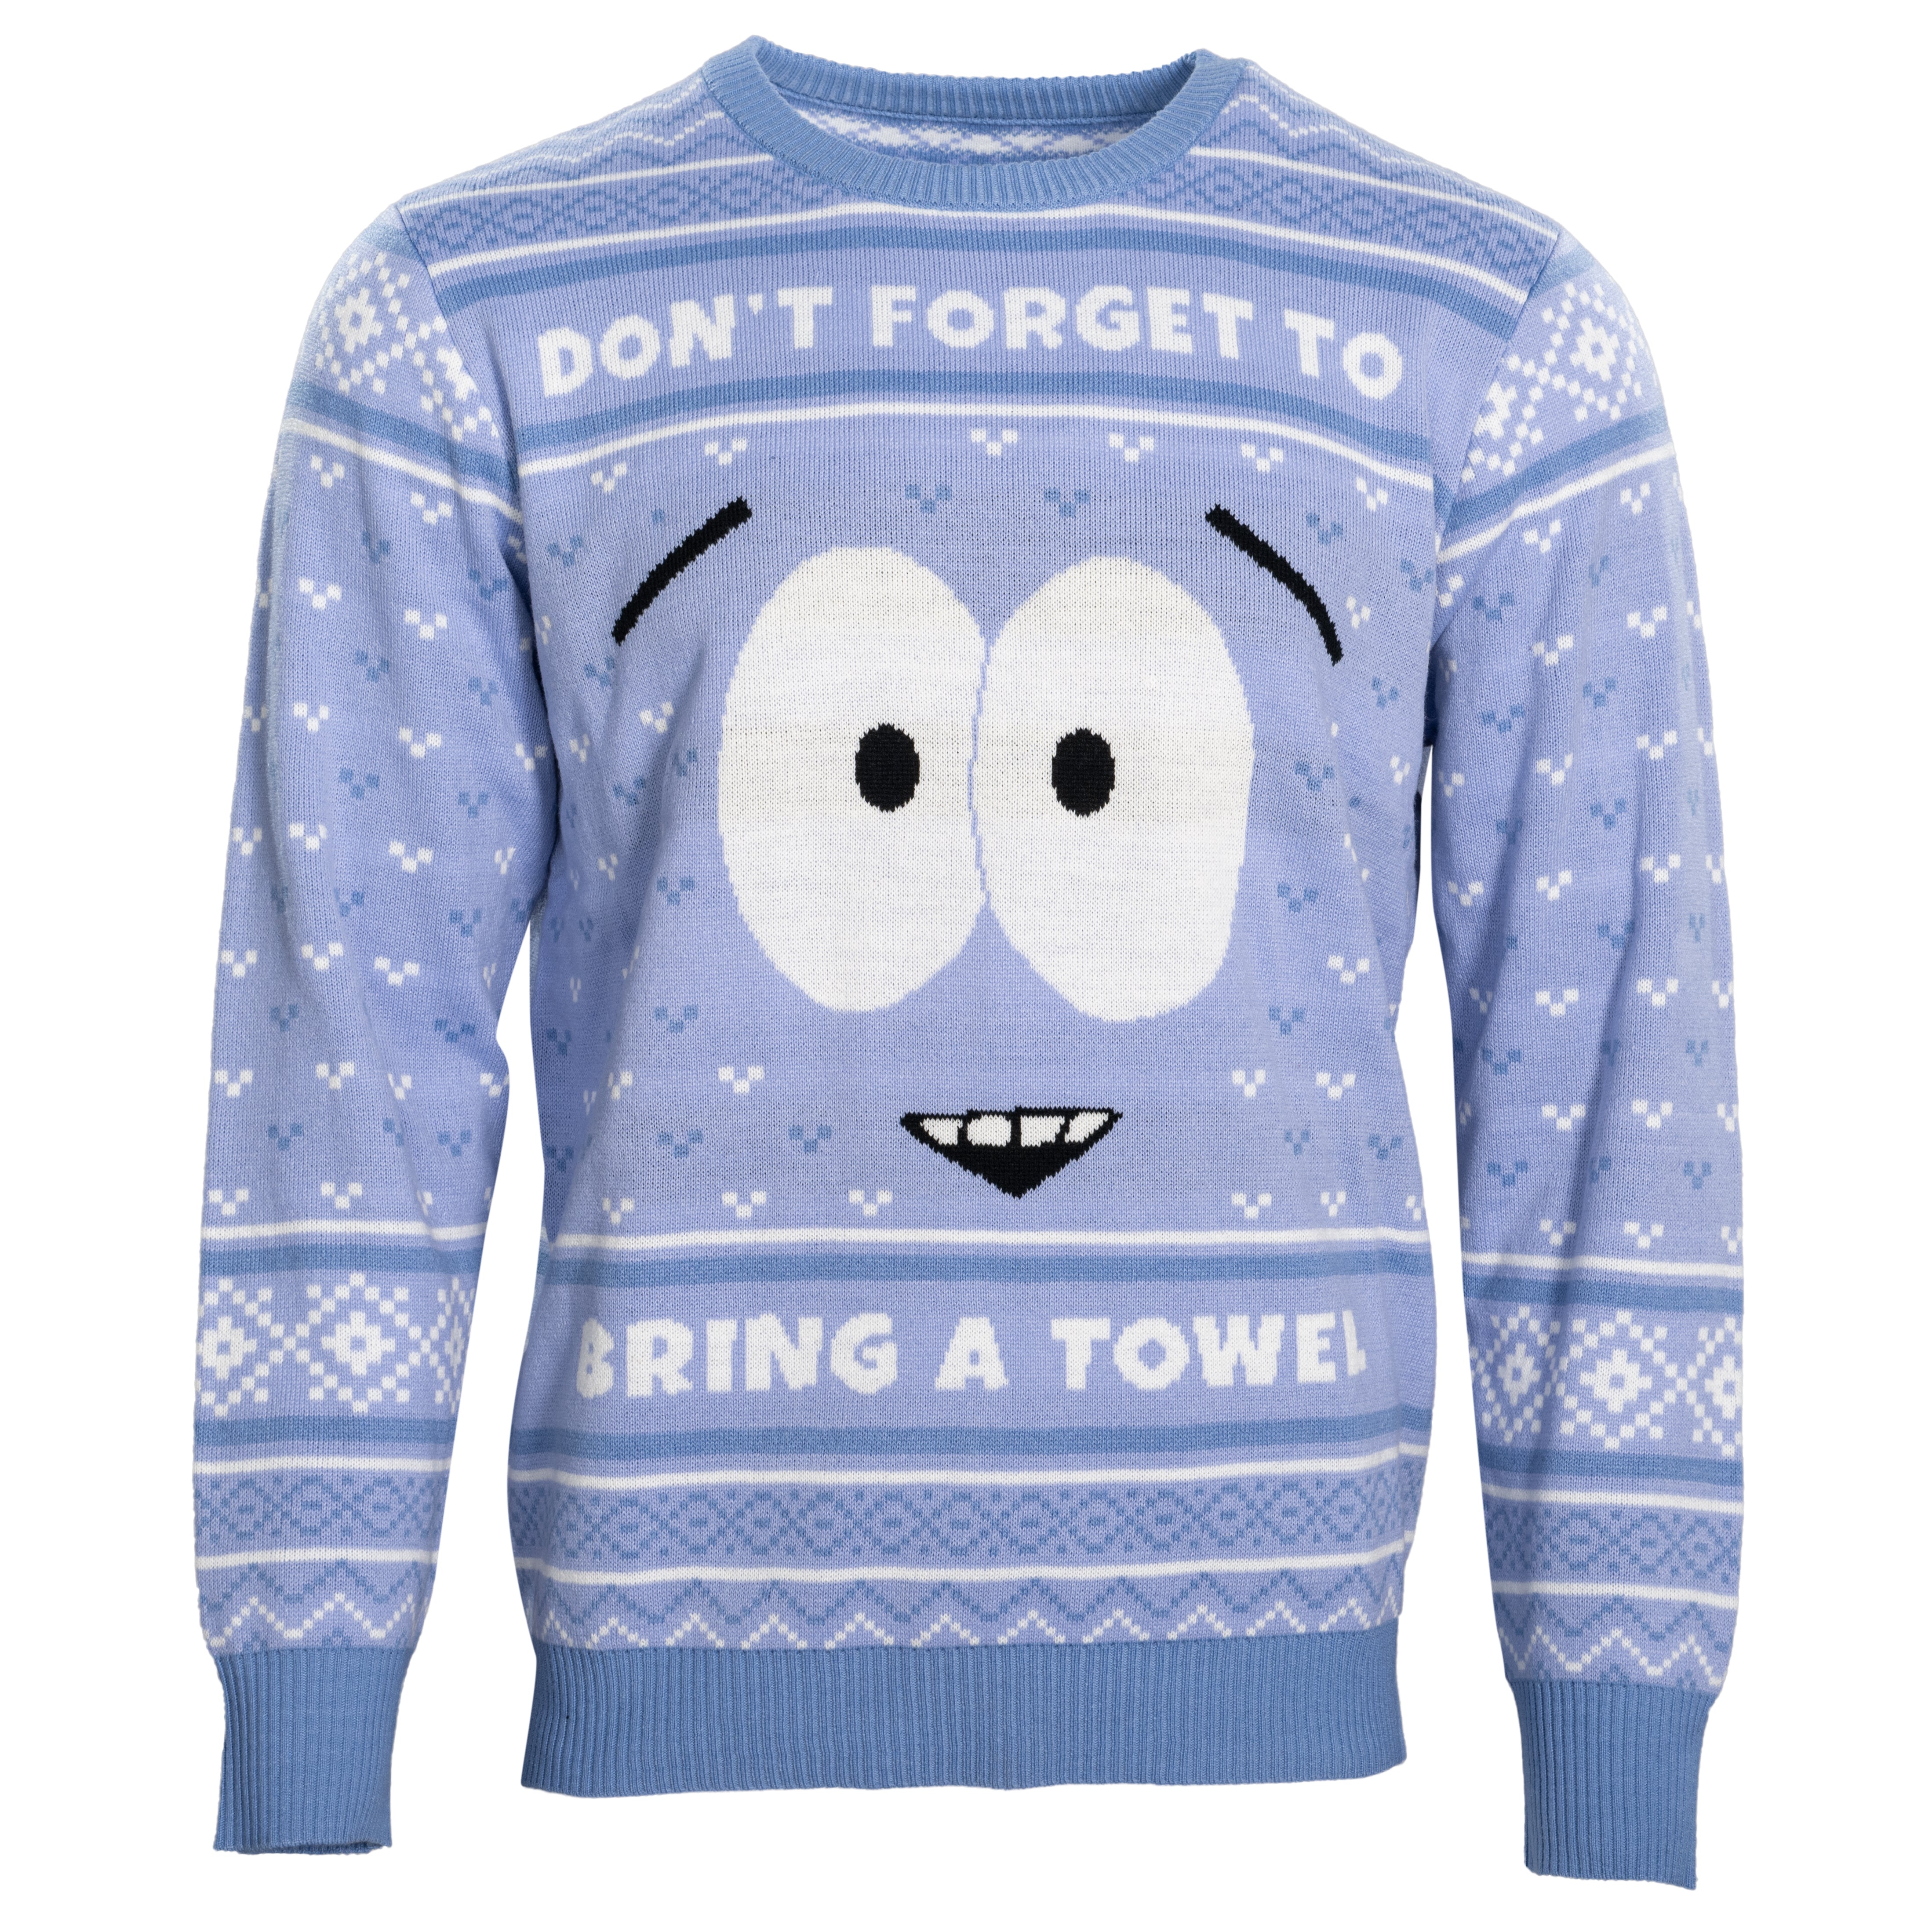 Southpark Towelie Bring A Towel Ugly Christmas Sweater